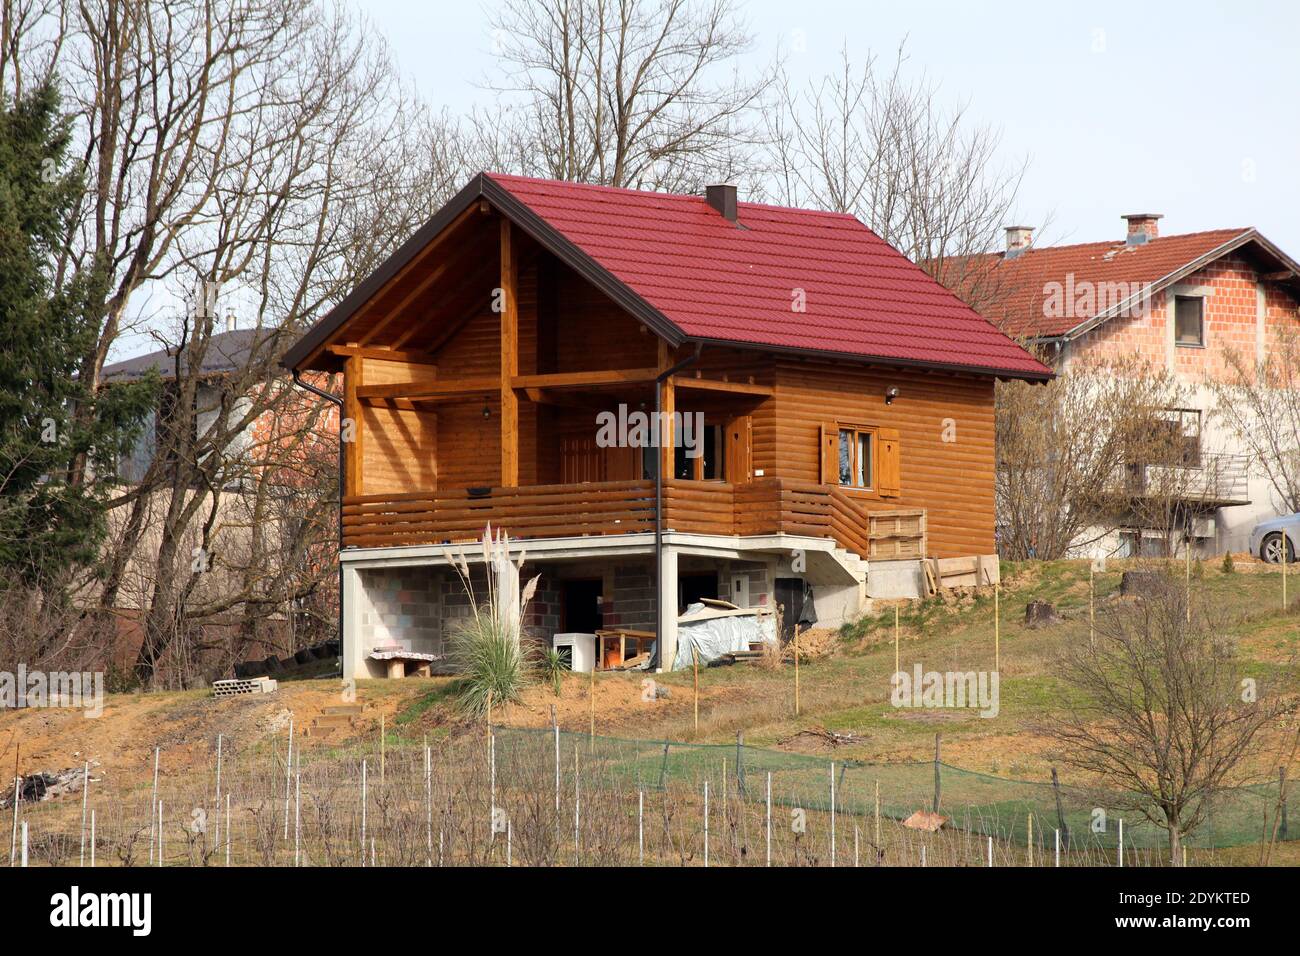 Modern Newly Built Wooden Log House With Big Open Porch In Front And New Roof Tiles On Side Of Small Hill Surrounded With Trees And Family Houses Stock Photo Alamy